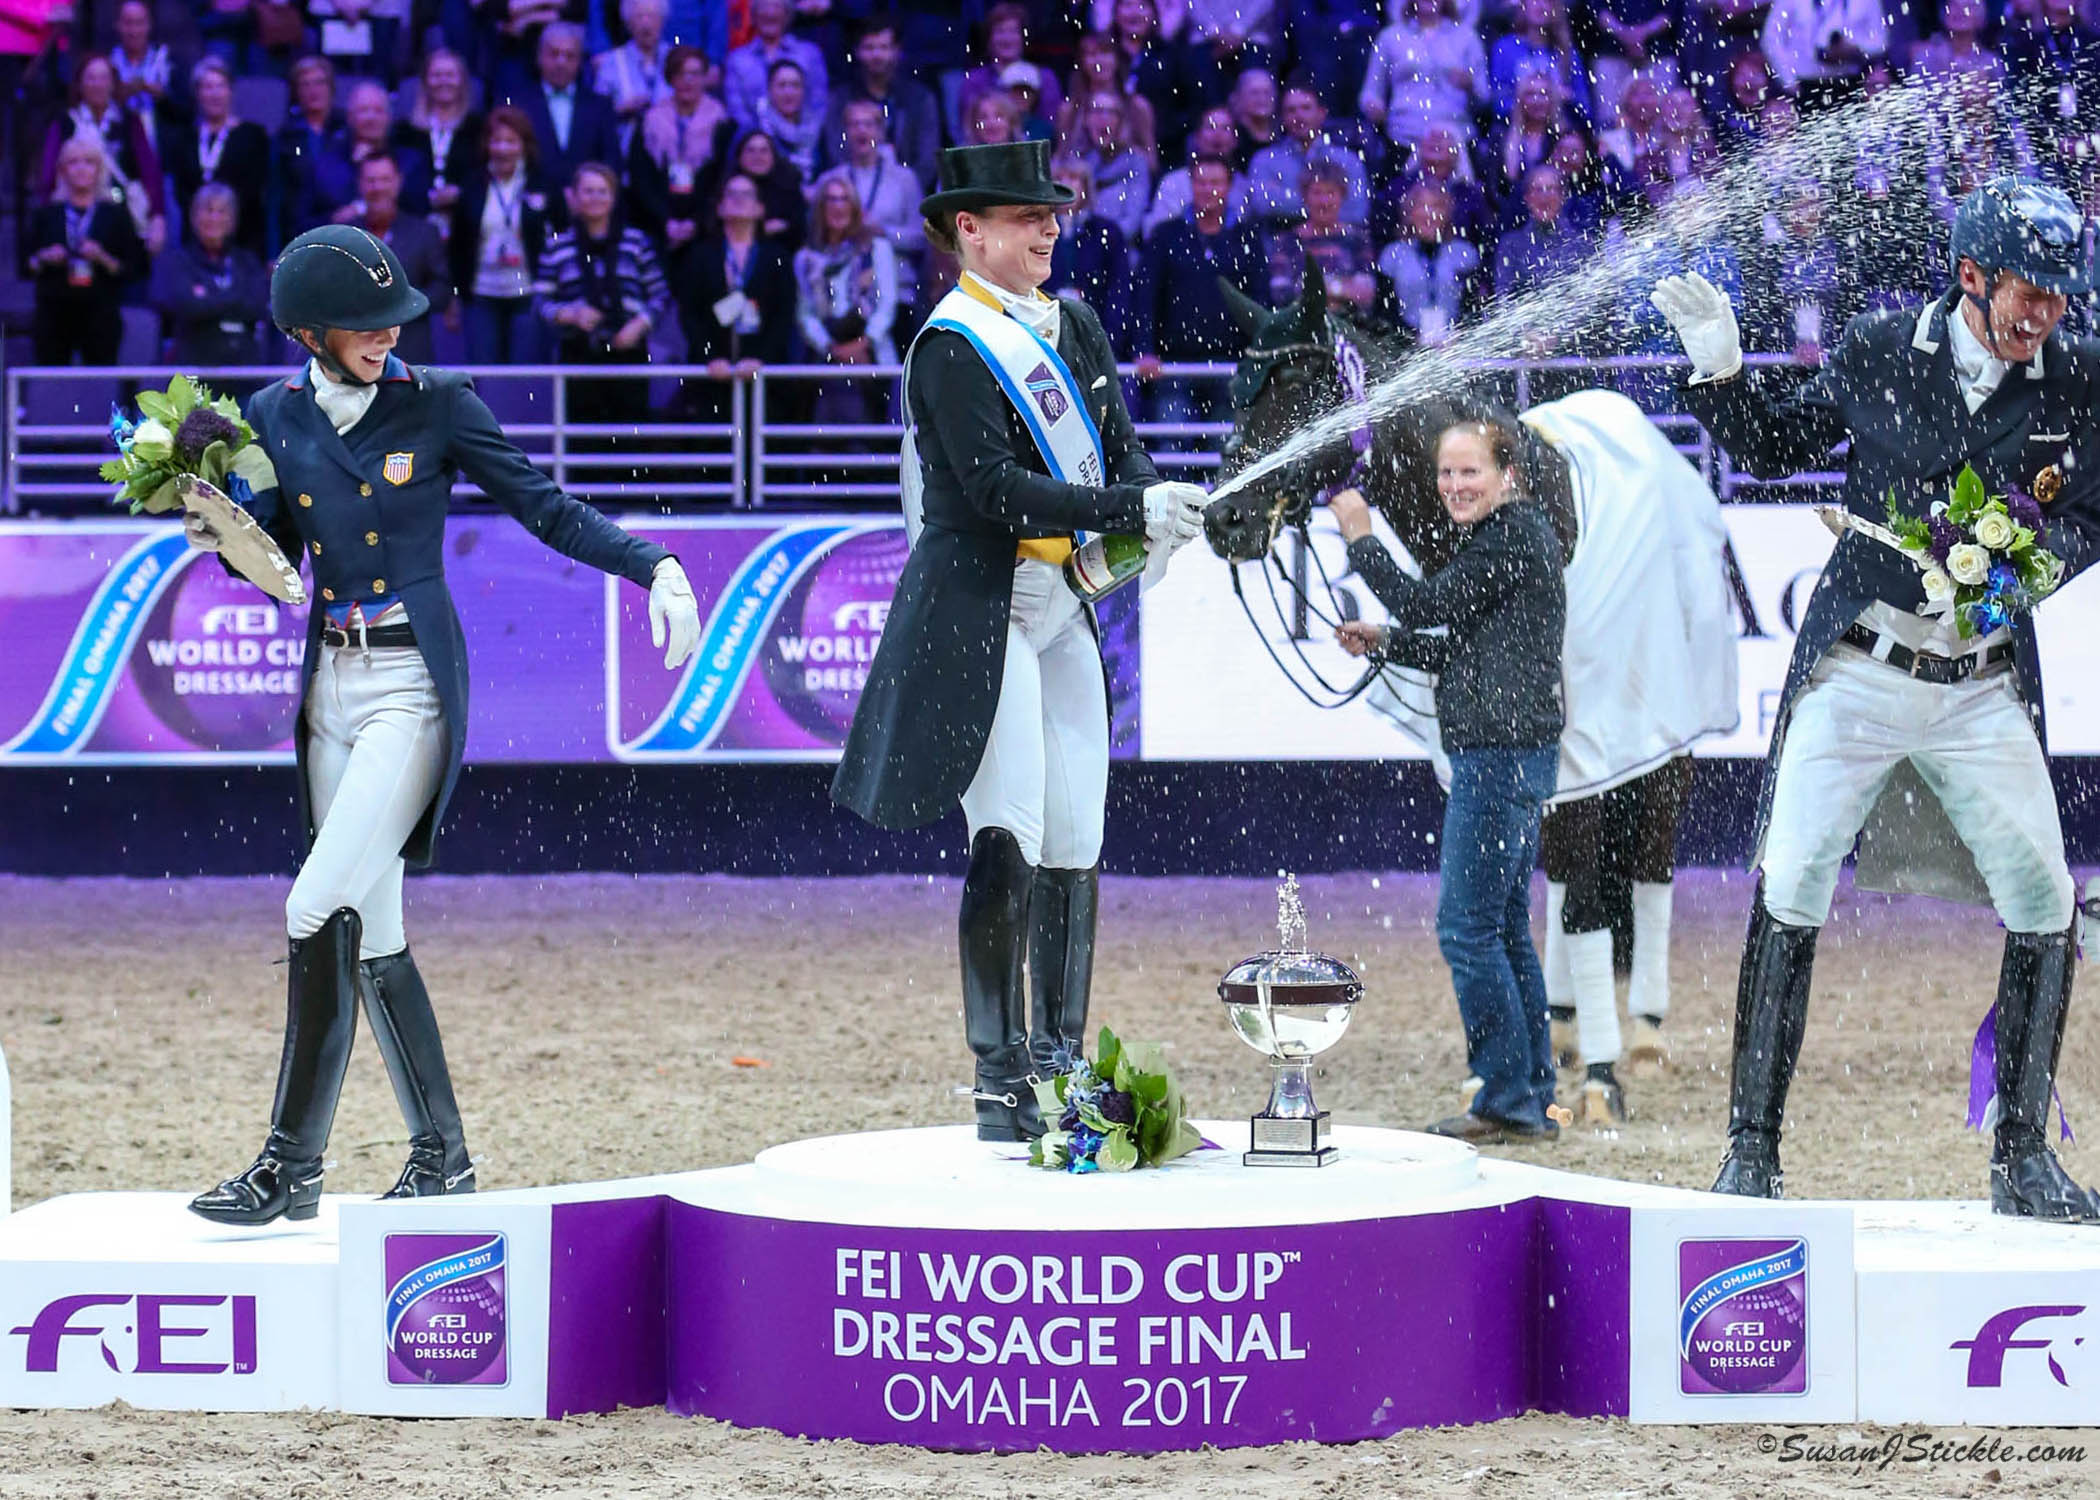 FEI World Cup Finals 2017 Dressage winners with Isabell Werth shooting champagne